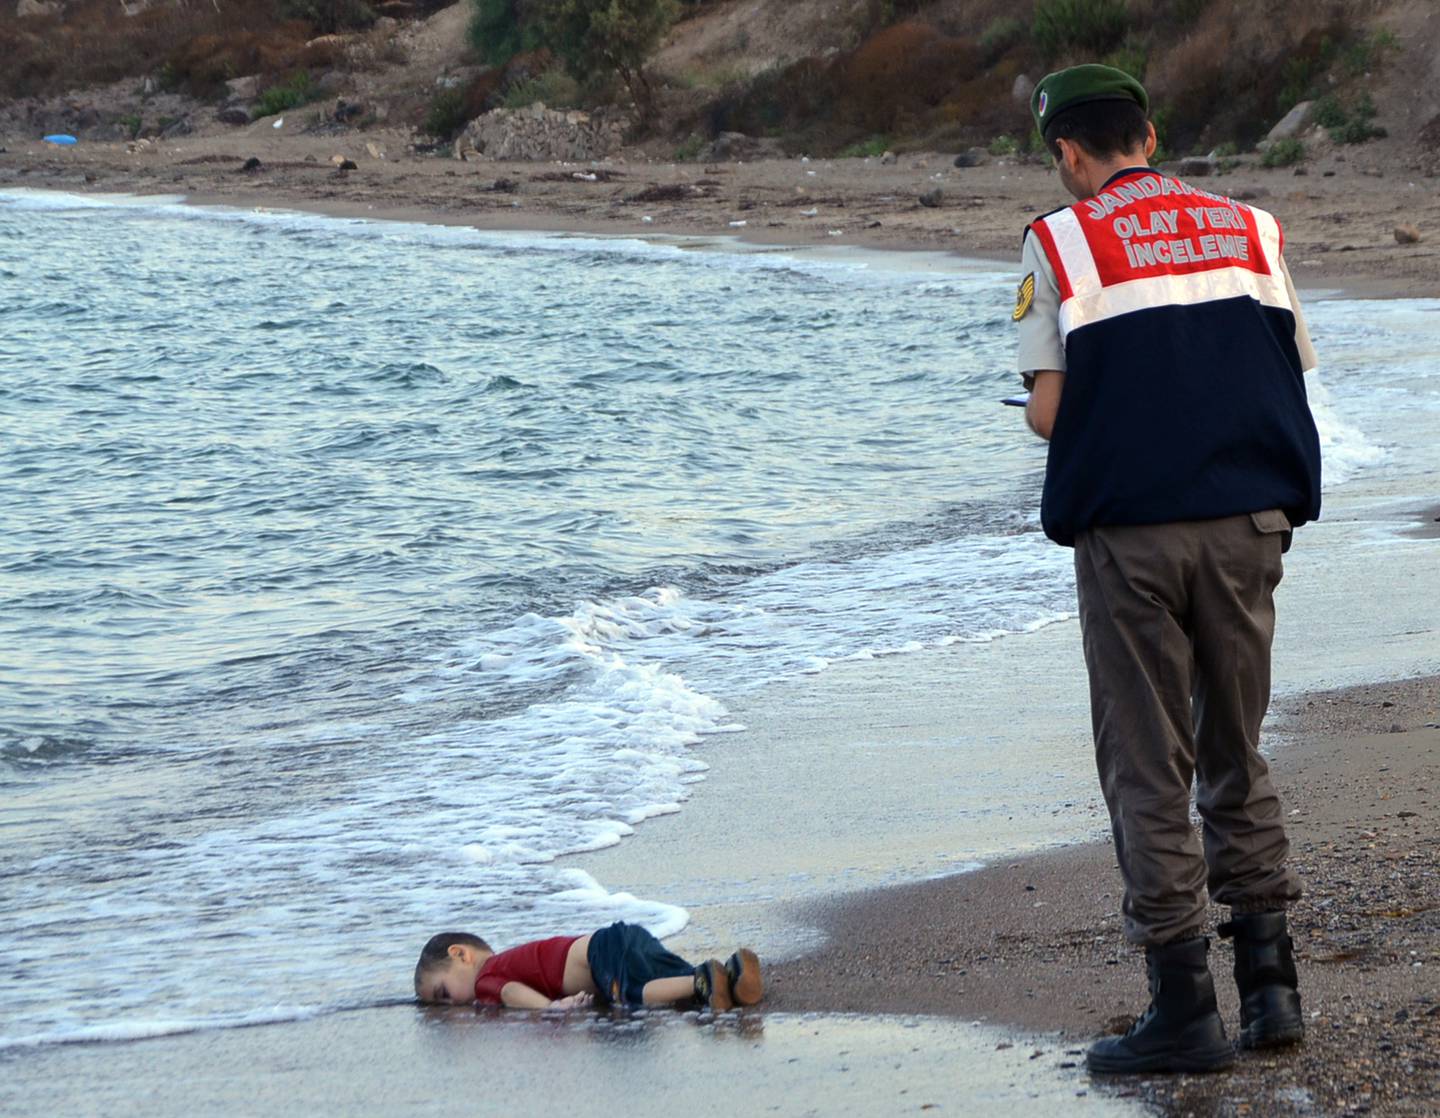 ADDS IDENTIFICATION OF CHILD  A paramilitary police officer investigates the scene before carrying the lifeless body of Aylan Kurdi, 3, after a number of migrants died and a smaller number were reported missing after boats carrying them to the Greek island of Kos capsized, near the Turkish resort of Bodrum early Wednesday, Sept. 2, 2015. The family ó Abdullah, his wife Rehan and their two boys, 3-year-old Aylan and 5-year-old Galip ó embarked on the perilous boat journey only after their bid to move to Canada was rejected. The tides also washed up the bodies of Rehan and Galip on Turkey's Bodrum peninsula Wednesday, Abdullah survived the tragedy. (AP Photo/DHA) TURKEY OUT  ONLINE OUT